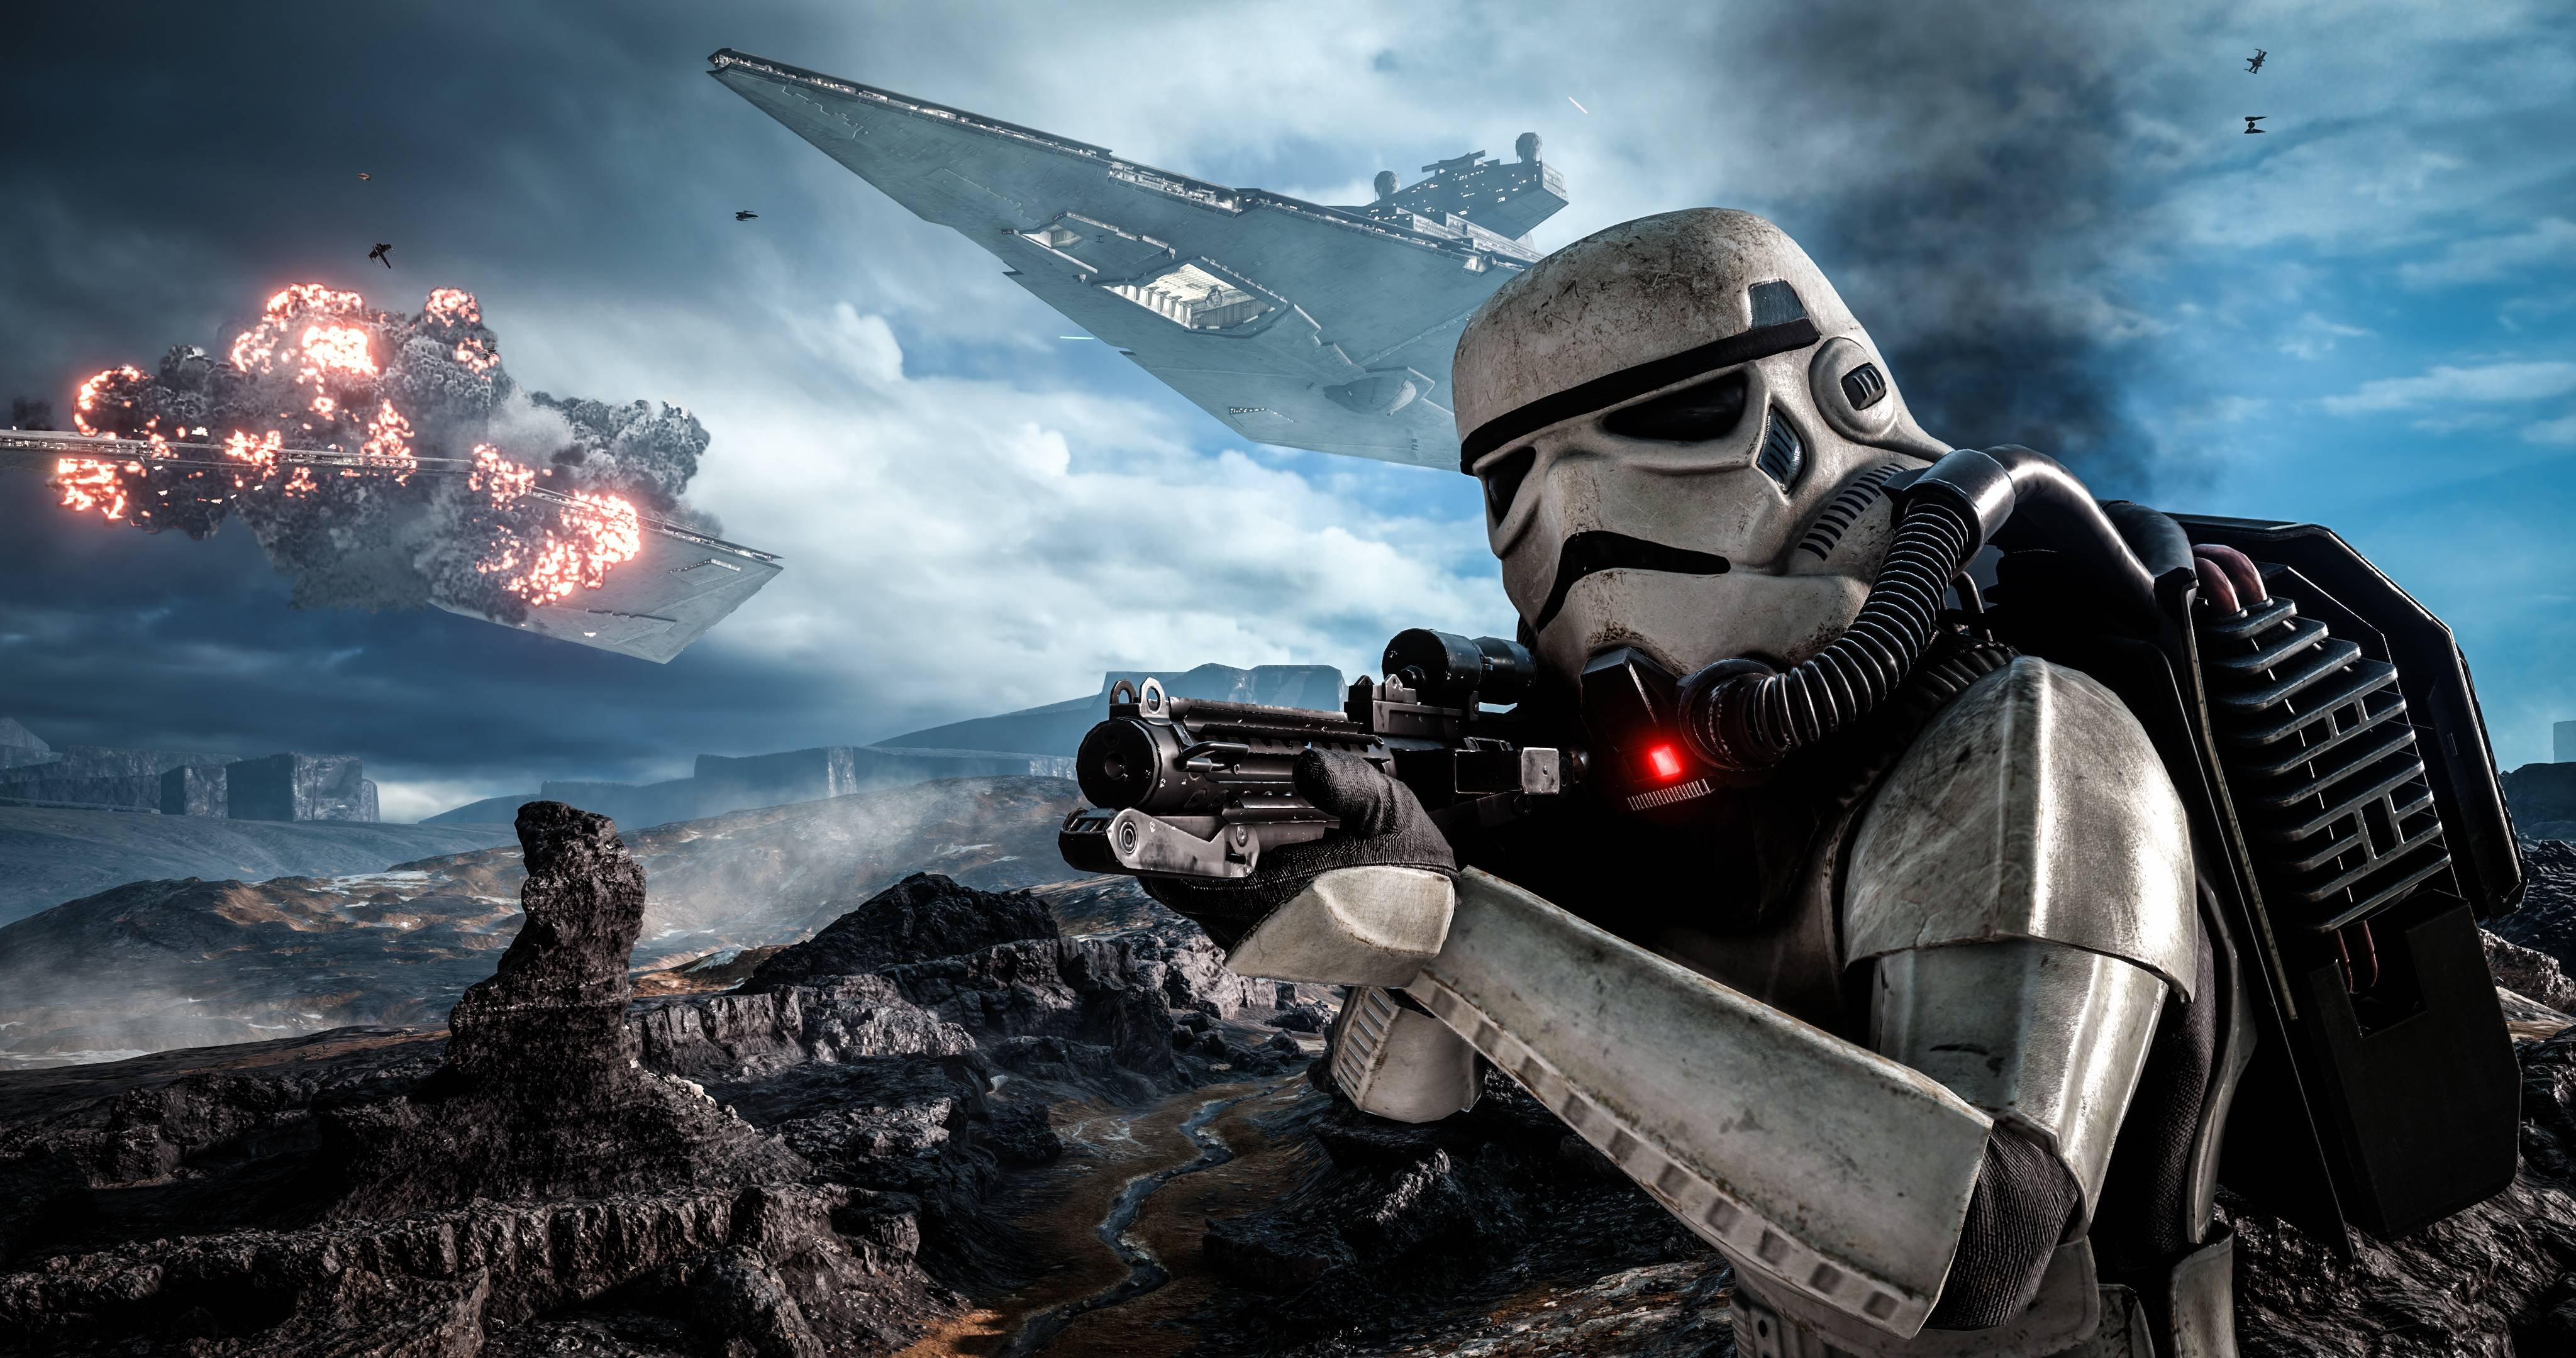 star, Wars, Battlefront, Sci fi, 1swbattlefront, Action, Fighting, Futuristic, Shooter Wallpaper